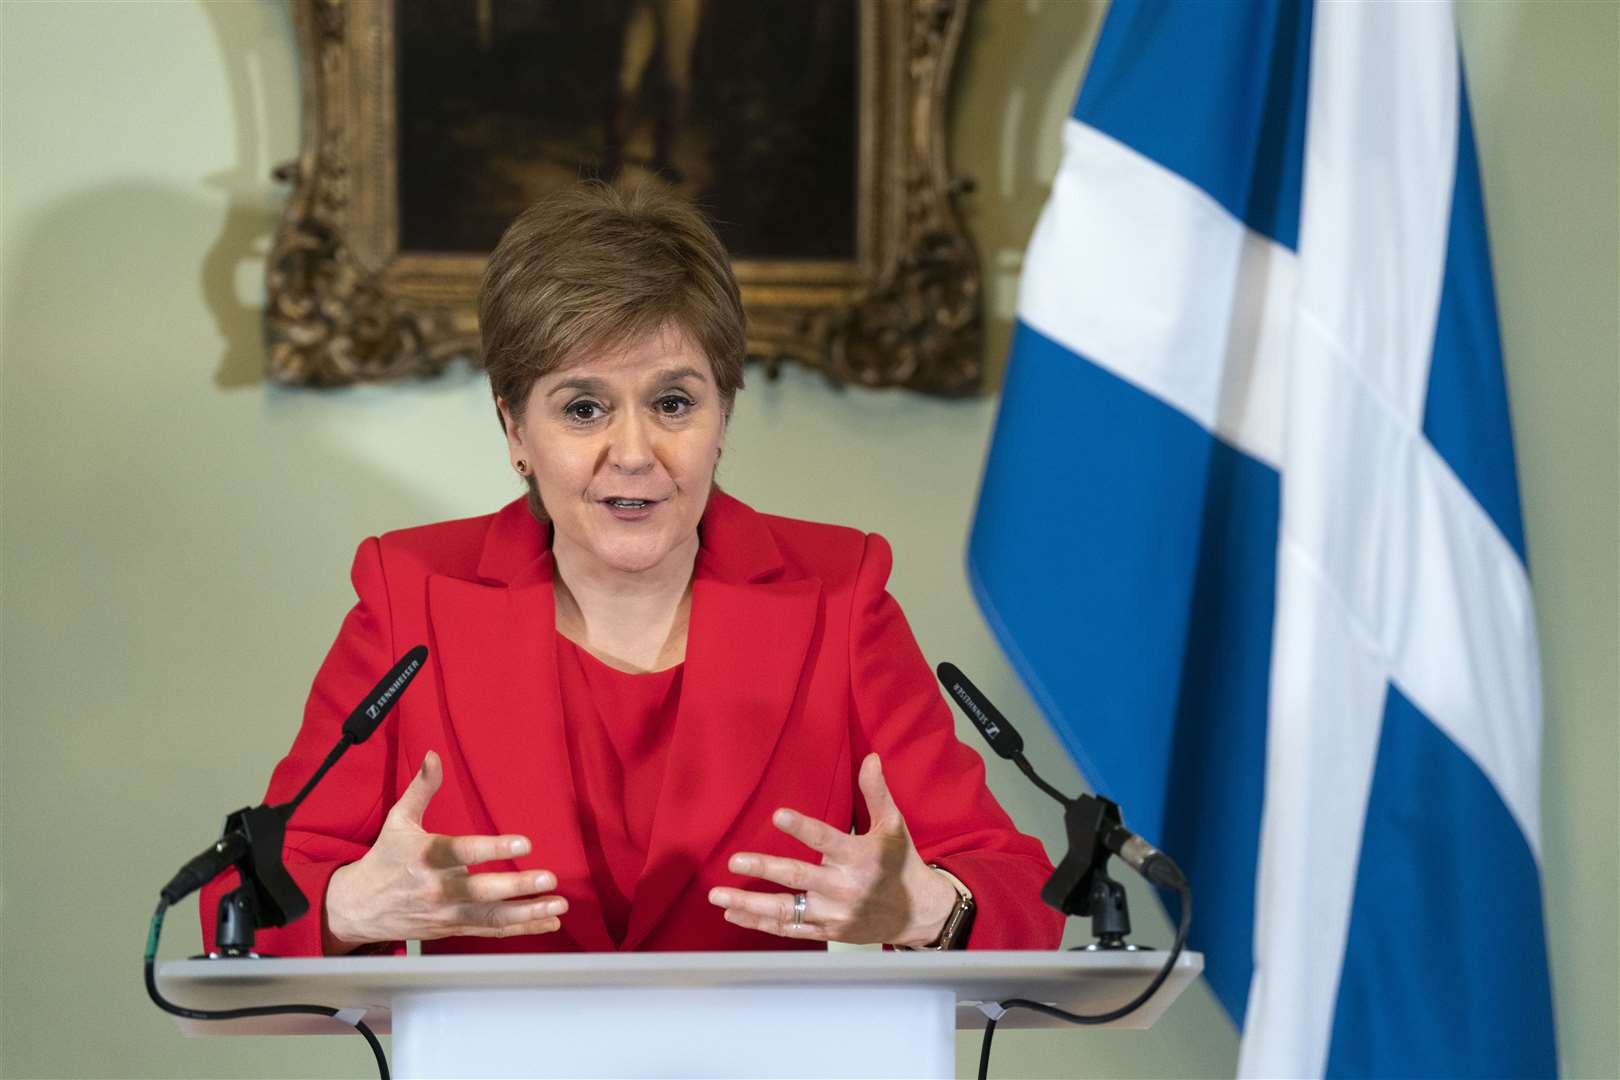 Nicola Sturgeon has announced her intention to step down as SNP leader (Jane Barlow/PA)